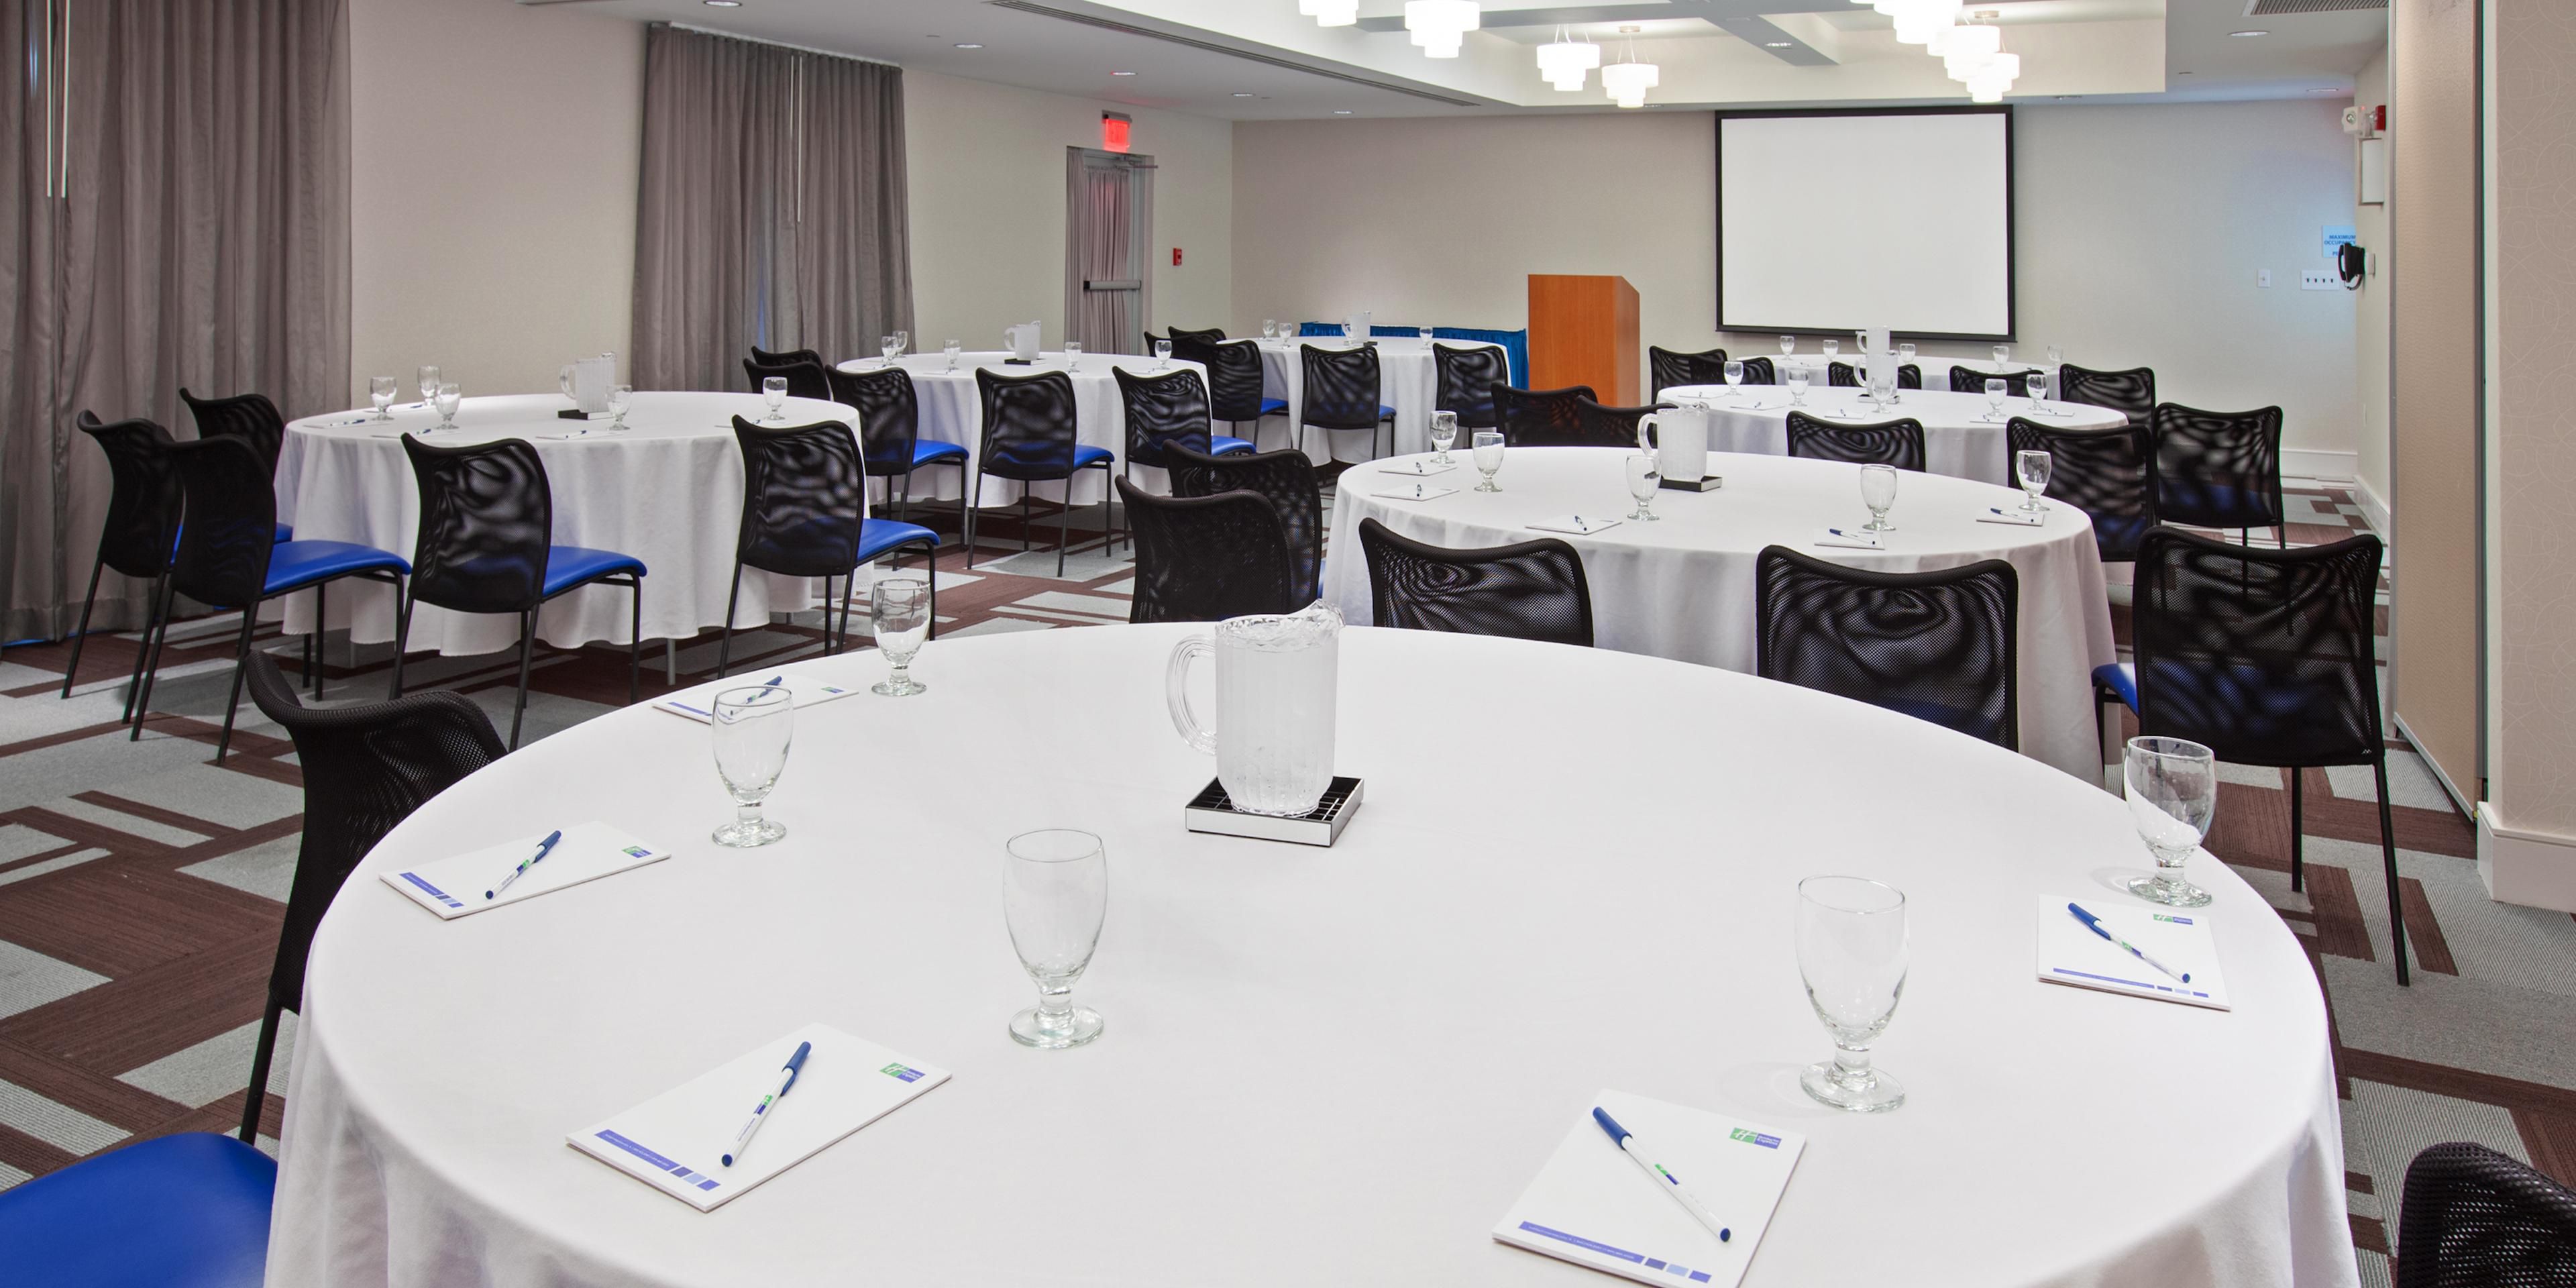 Planning to meet with the team? Our hotel offers 1300 sq ft of flexible meeting space. We take pride in providing everything you need to make your meeting a huge success! Our team looks forward to serving you.